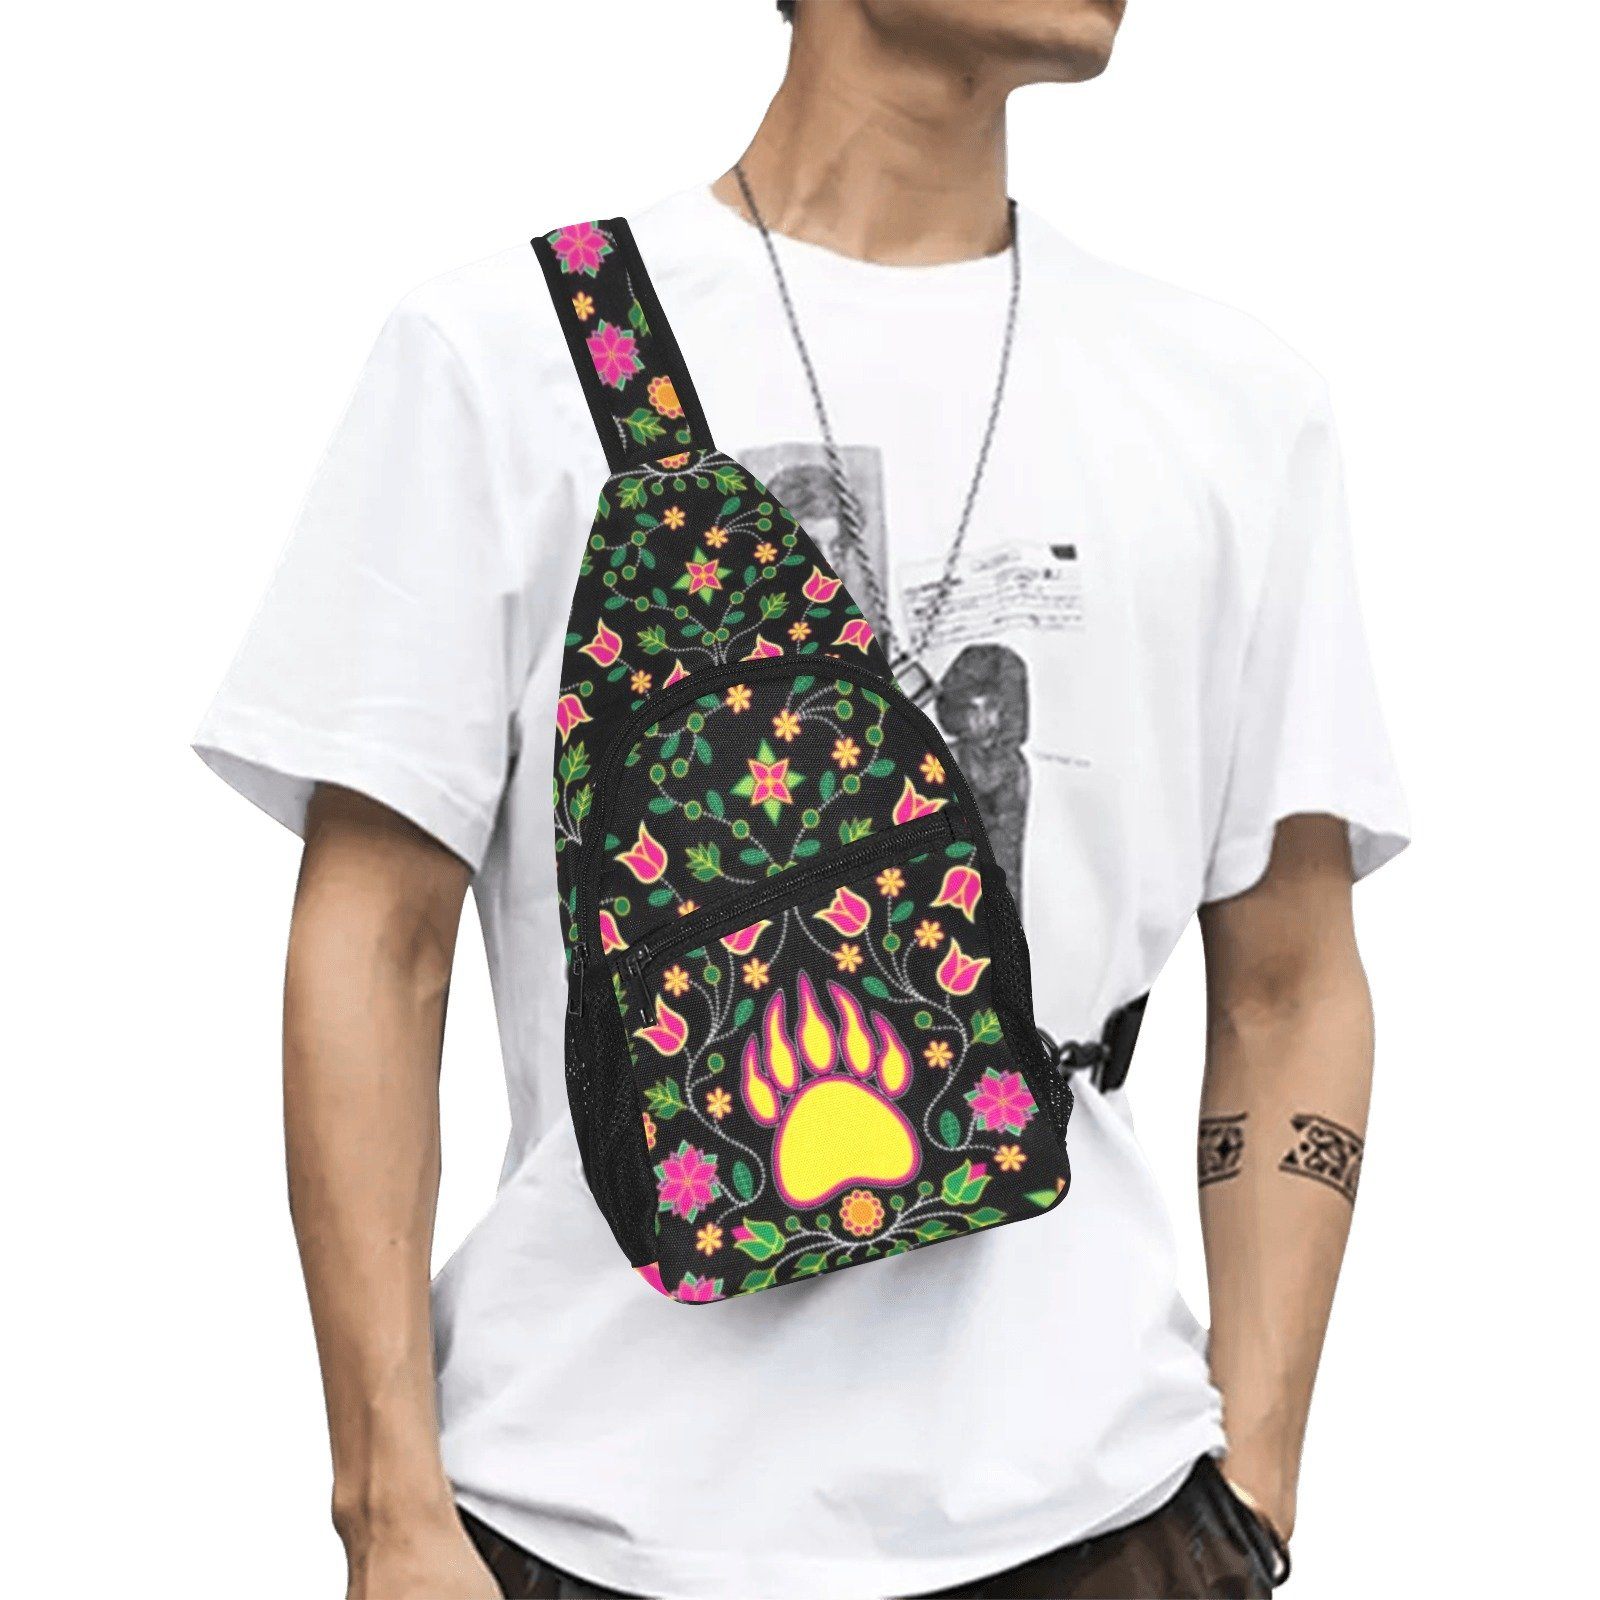 Floral Bearpaw Pink and Yellow All Over Print Chest Bag (Model 1719) All Over Print Chest Bag (1719) e-joyer 